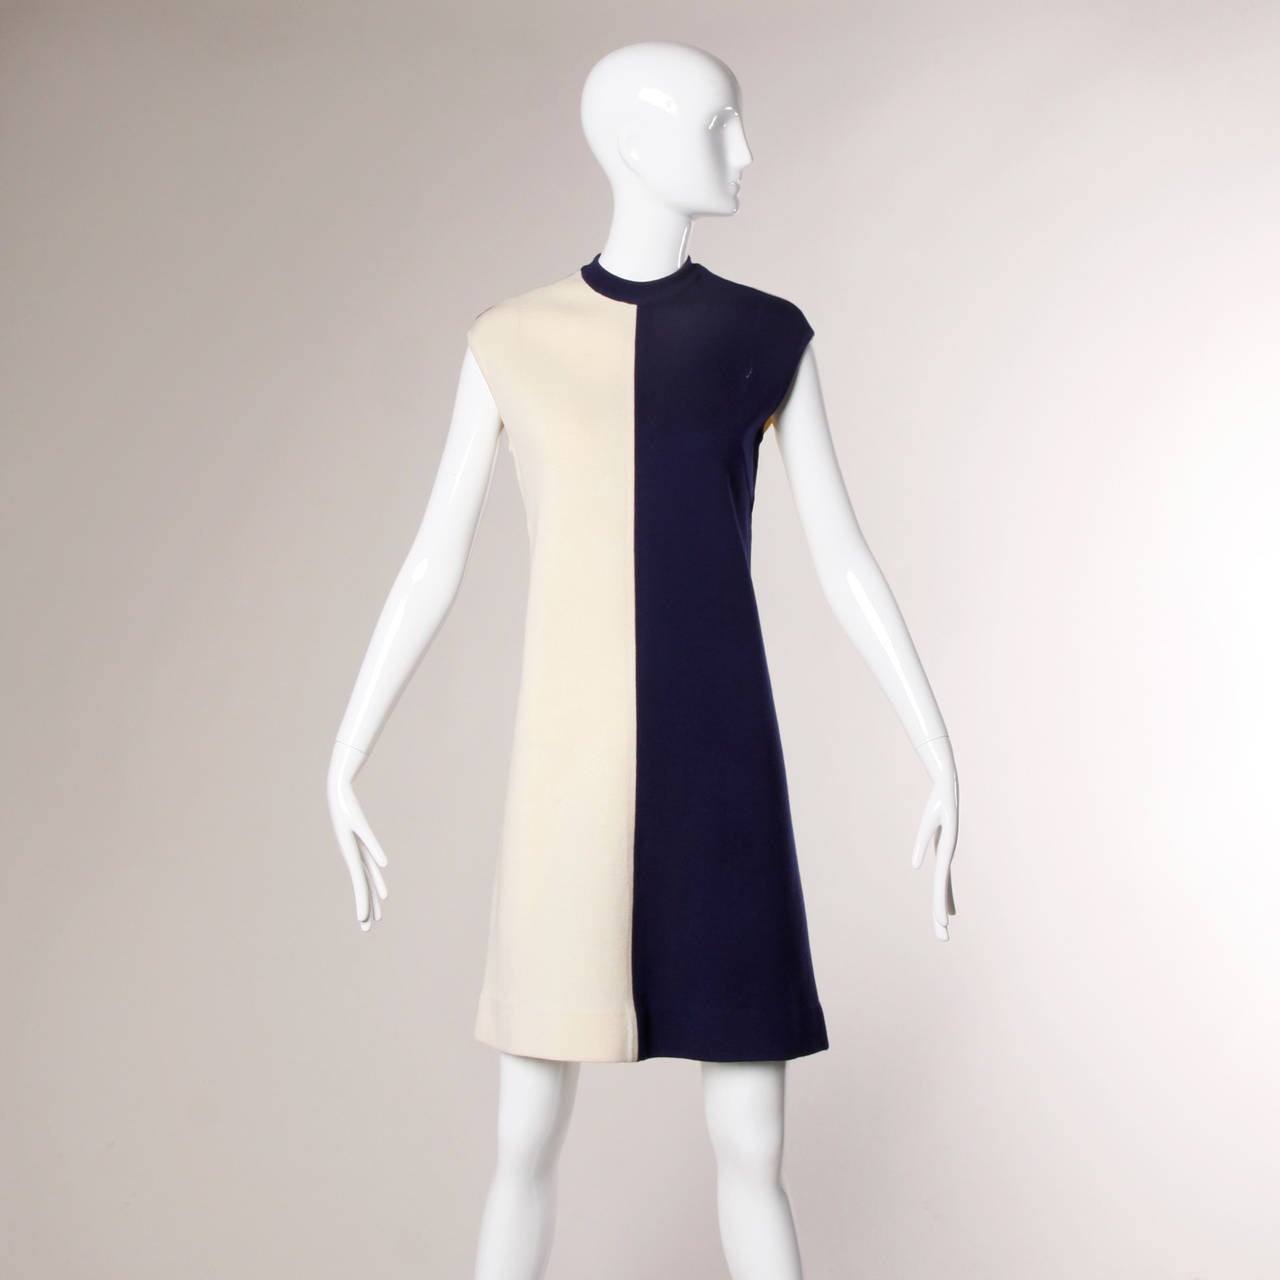 1960s vintage navy and off-white wool knit 2-piece ensemble that can be worn together or as separates. Geometric mod striped design with a military vibe. Two-tone shift dress with sleeveless sleeves and a high neck.

Details:

Unlined
Back Zip